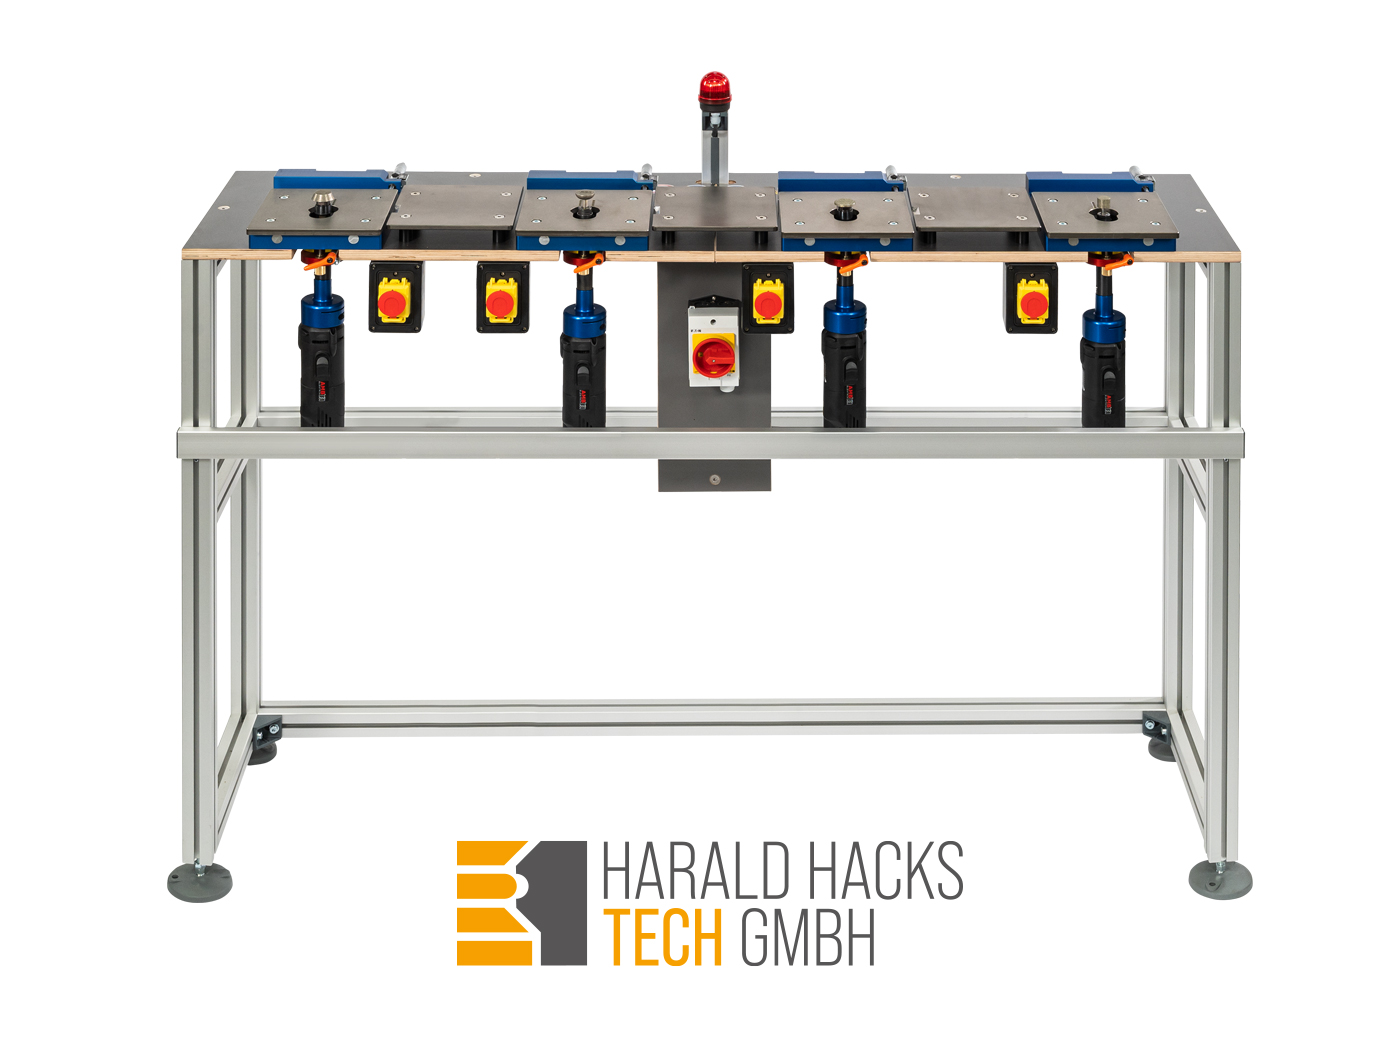 Harald Hacks Neck Ring and Mould Repair System (HHNMRS)